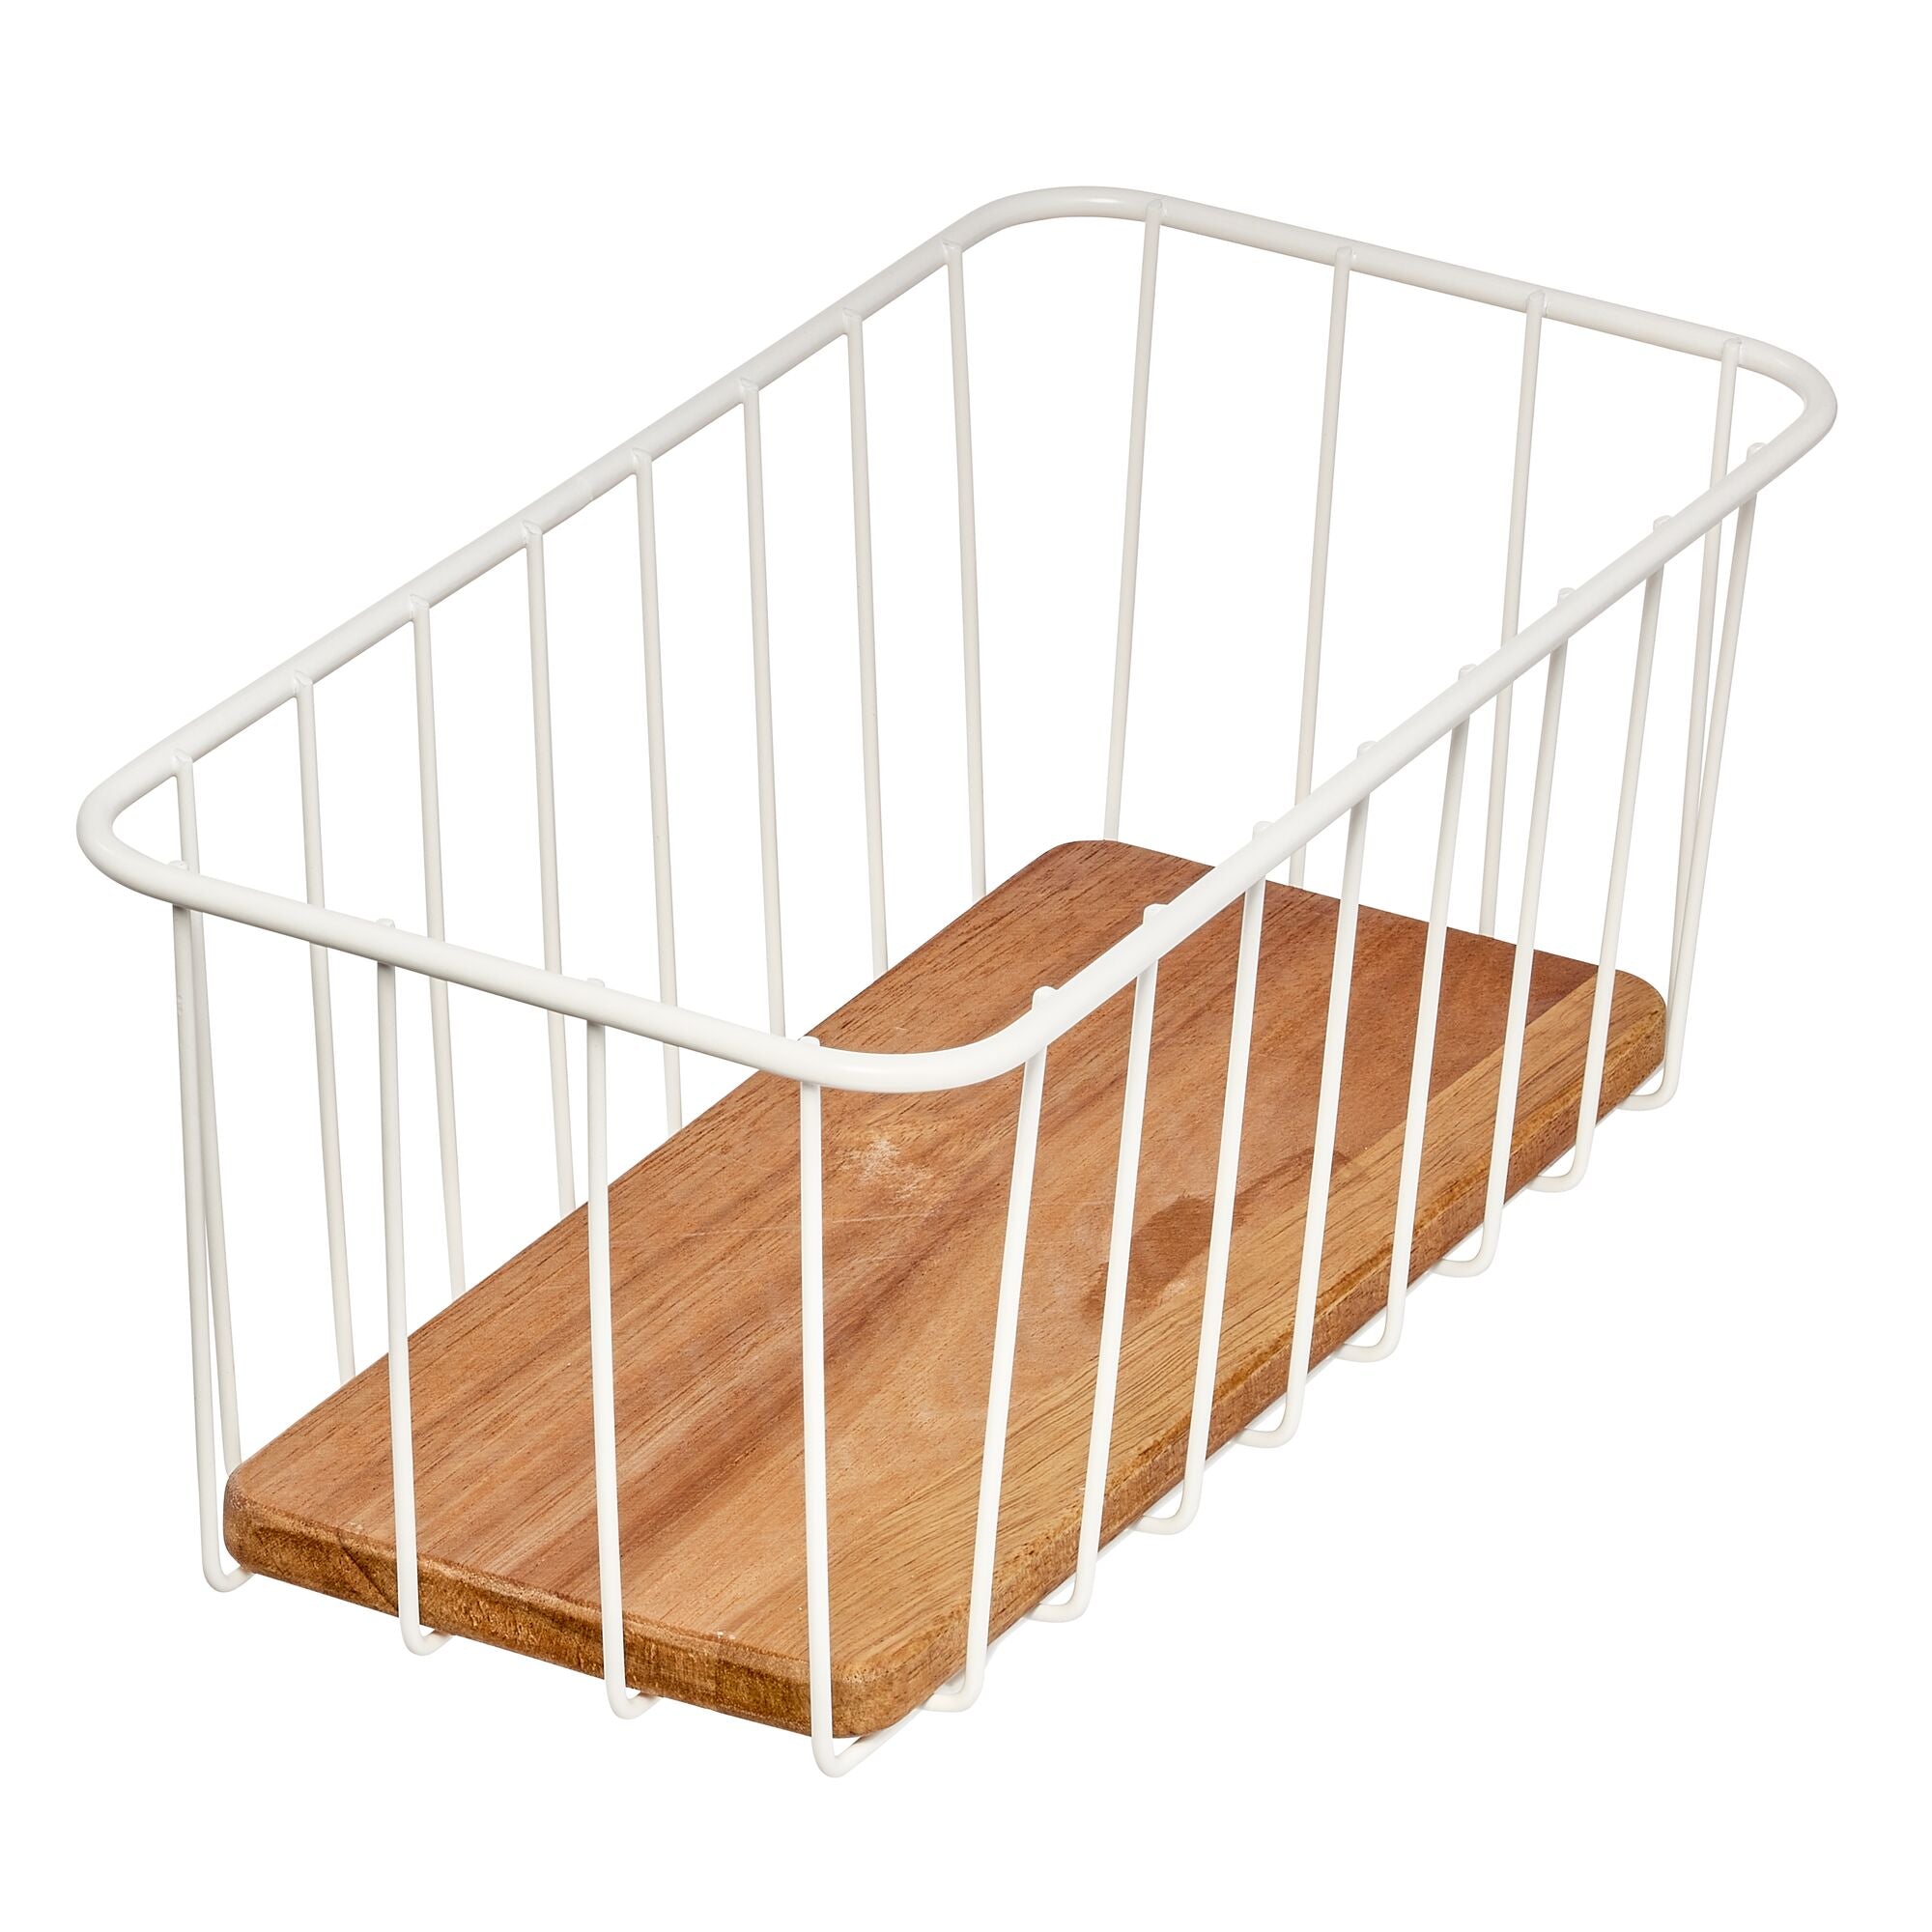 iDesign The RA Safford Collection Wire Basket with Acacia Wood, 10 x 8 x 5